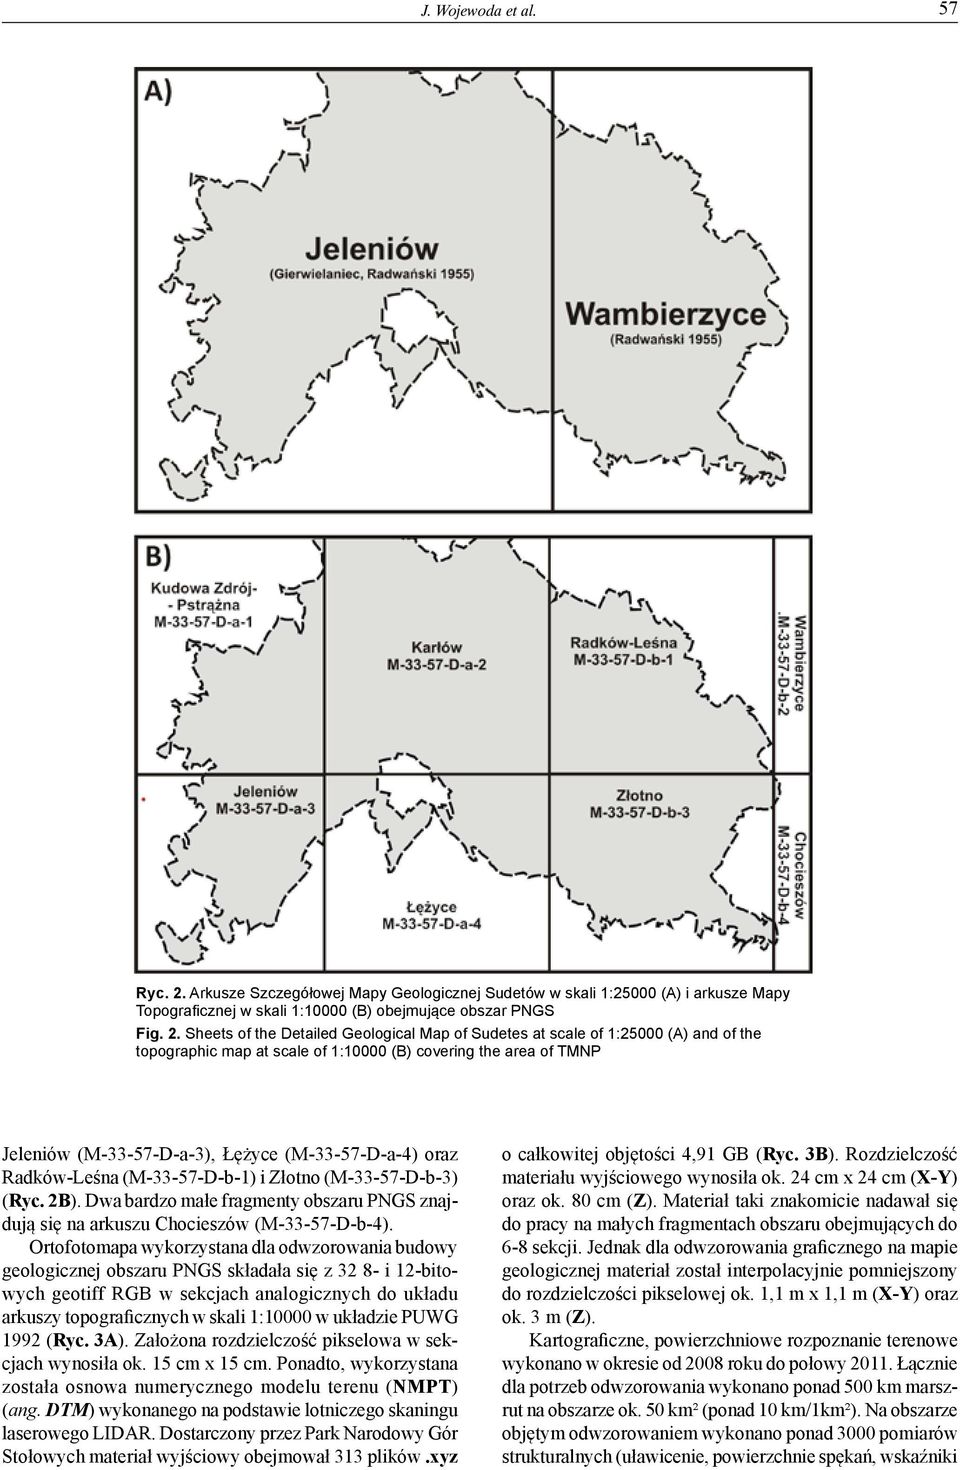 Sheets of the Detailed Geological Map of Sudetes at scale of 1:25000 (A) and of the topographic map at scale of 1:10000 (B) covering the area of TMNP Jeleniów (M-33-57-D-a-3), Łężyce (M-33-57-D-a-4)